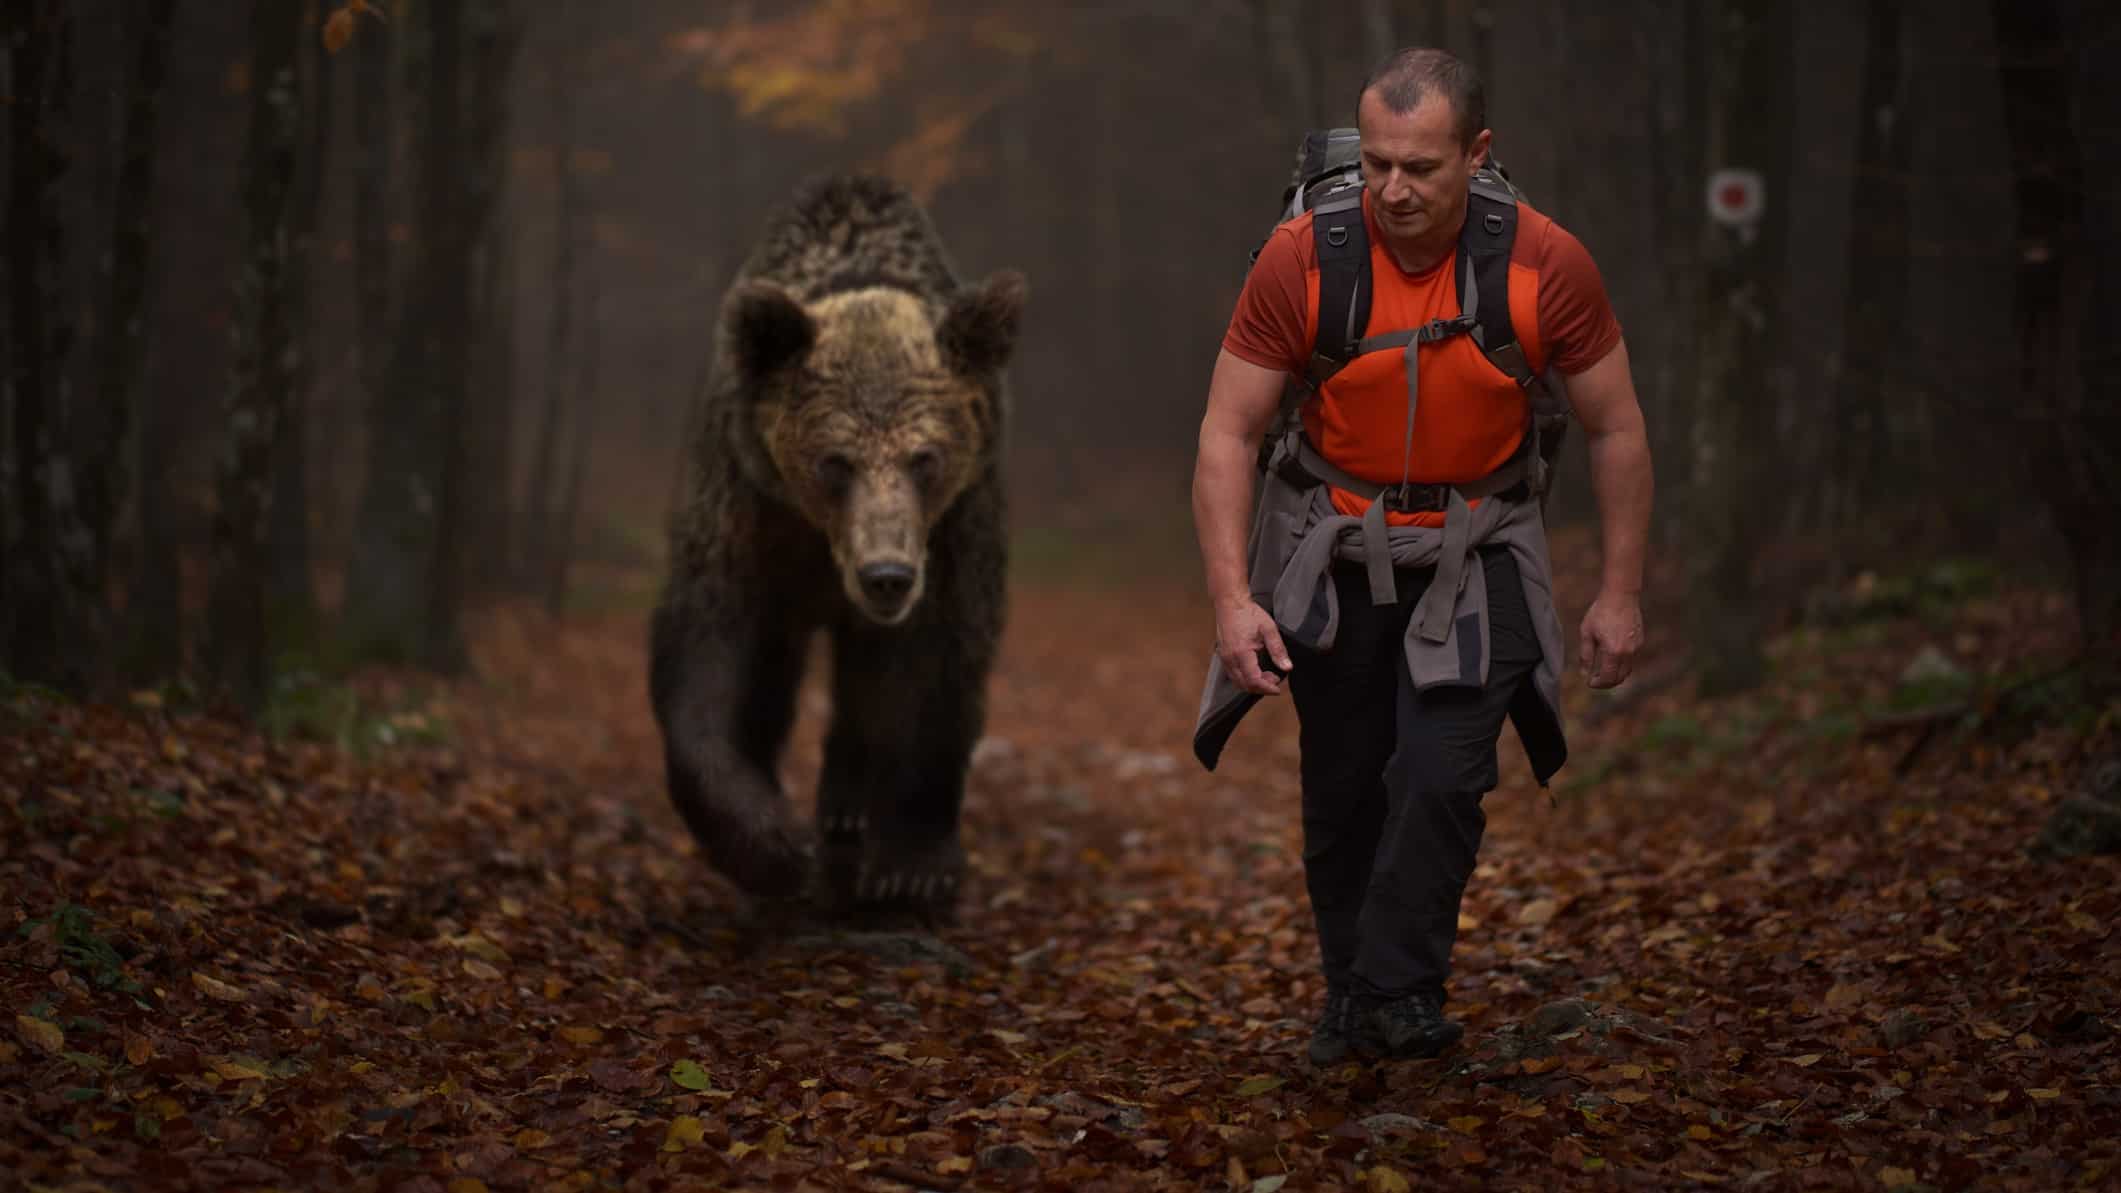 A large brown grizzly bear follows a male hiker who walks along a path littered with leaves in the woodest forest.